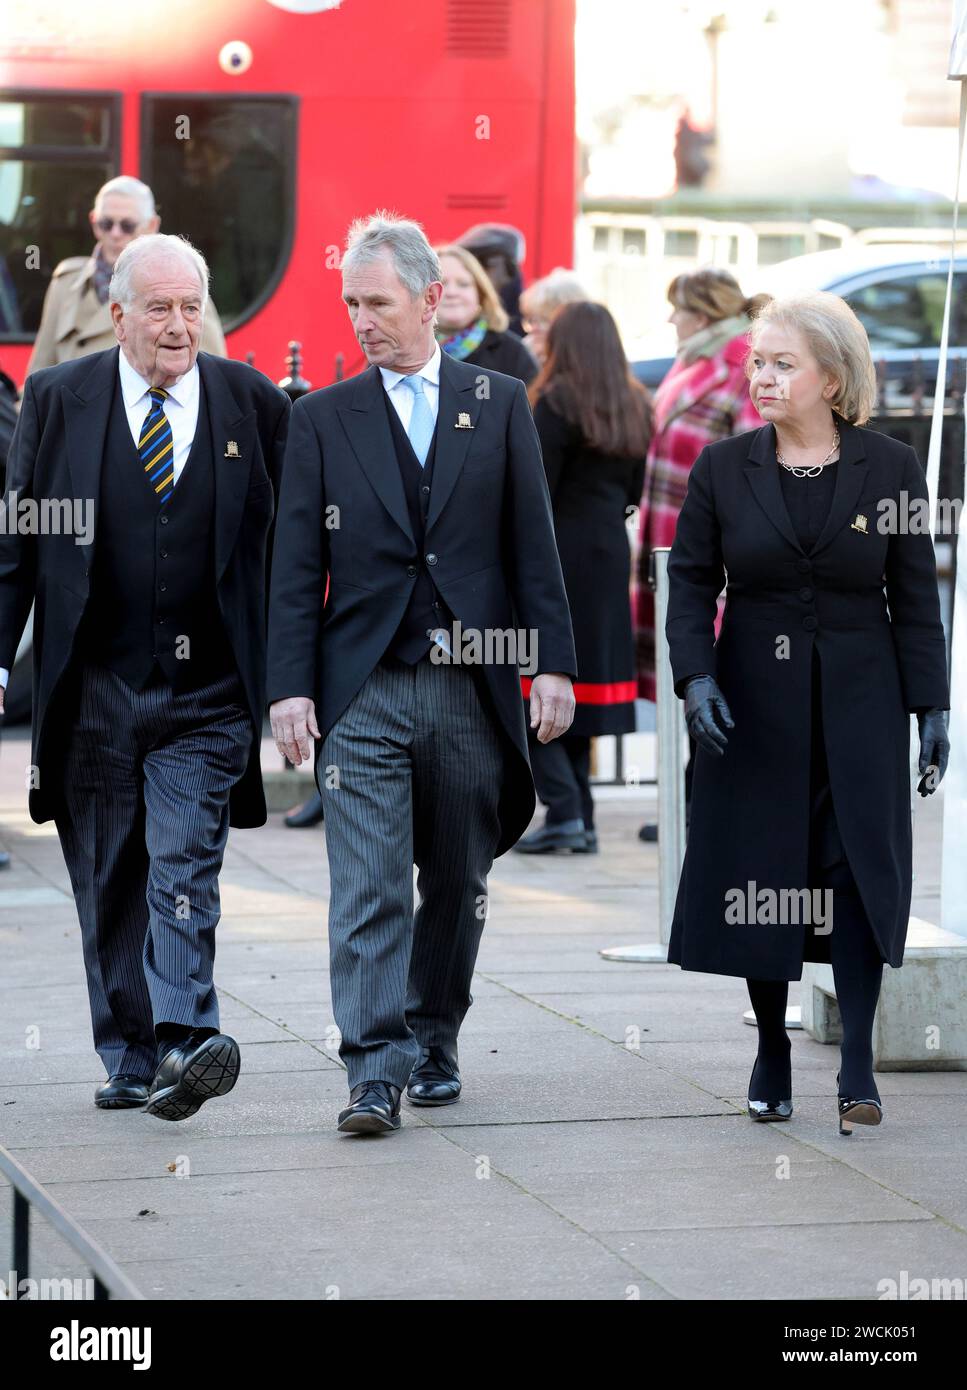 London, UK. 16th Jan, 2024. Image © Licensed to Parsons Media. 16/01/2024. London, United Kingdom. Service of Thanksgiving for Betty Boothroyd. Sir Roger Gale, Nigel Evans (centre) and Rosie Winterton - whp are all currently deputy speakers of the Commons attends a Service of Thanksgiving for the life and work of The Rt Hon the Baroness Boothroyd takes place in St Margaret's Church Westminster Abbey, London. Picture by Credit: andrew parsons/Alamy Live News Stock Photo